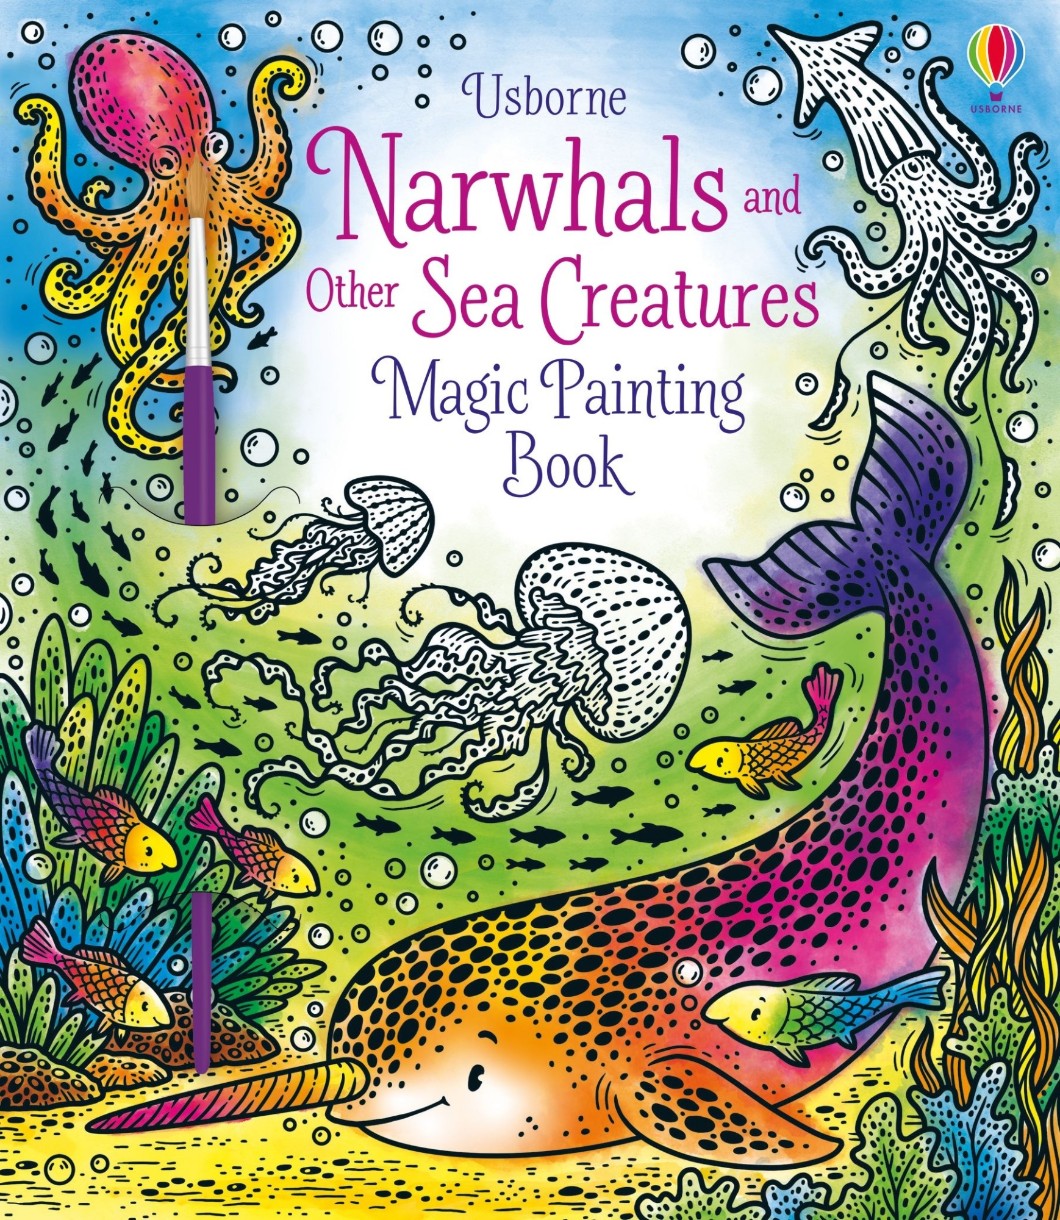 Cartea Magic painting narwhals and other sea creatures (9781474979610)